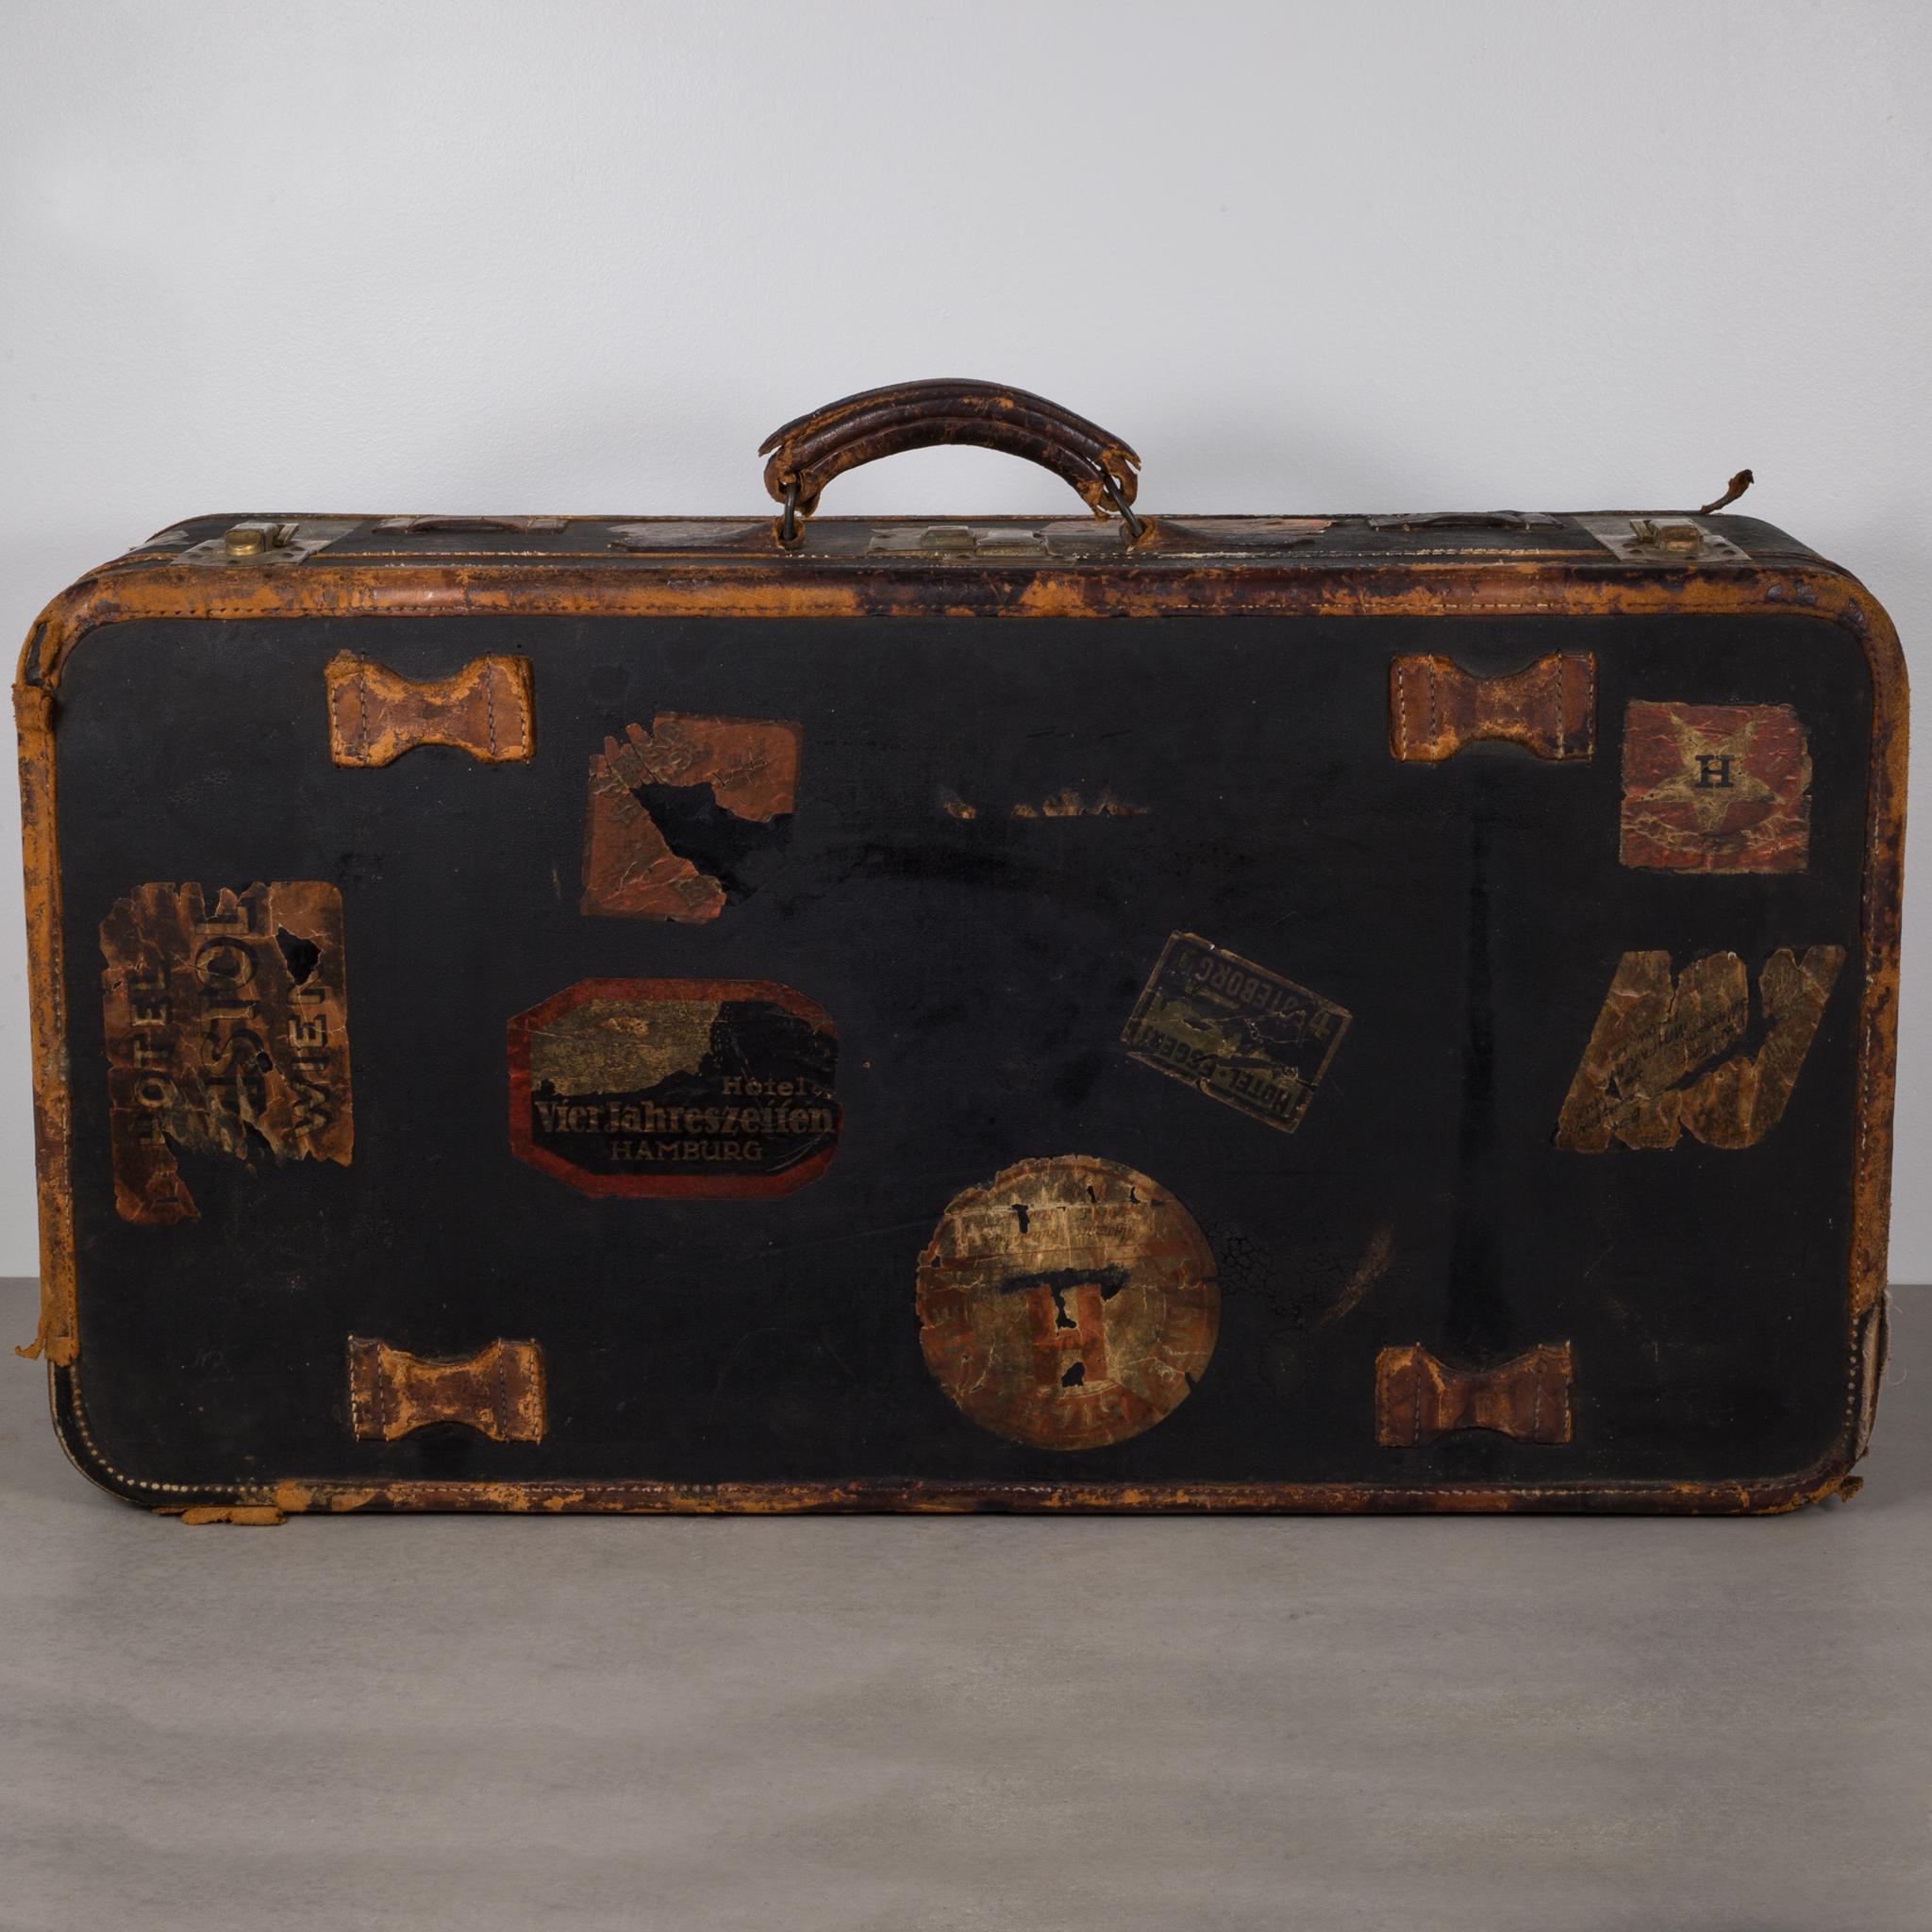 About:

This is an original antique luggage. The luggage is covered with travel stickers that include 